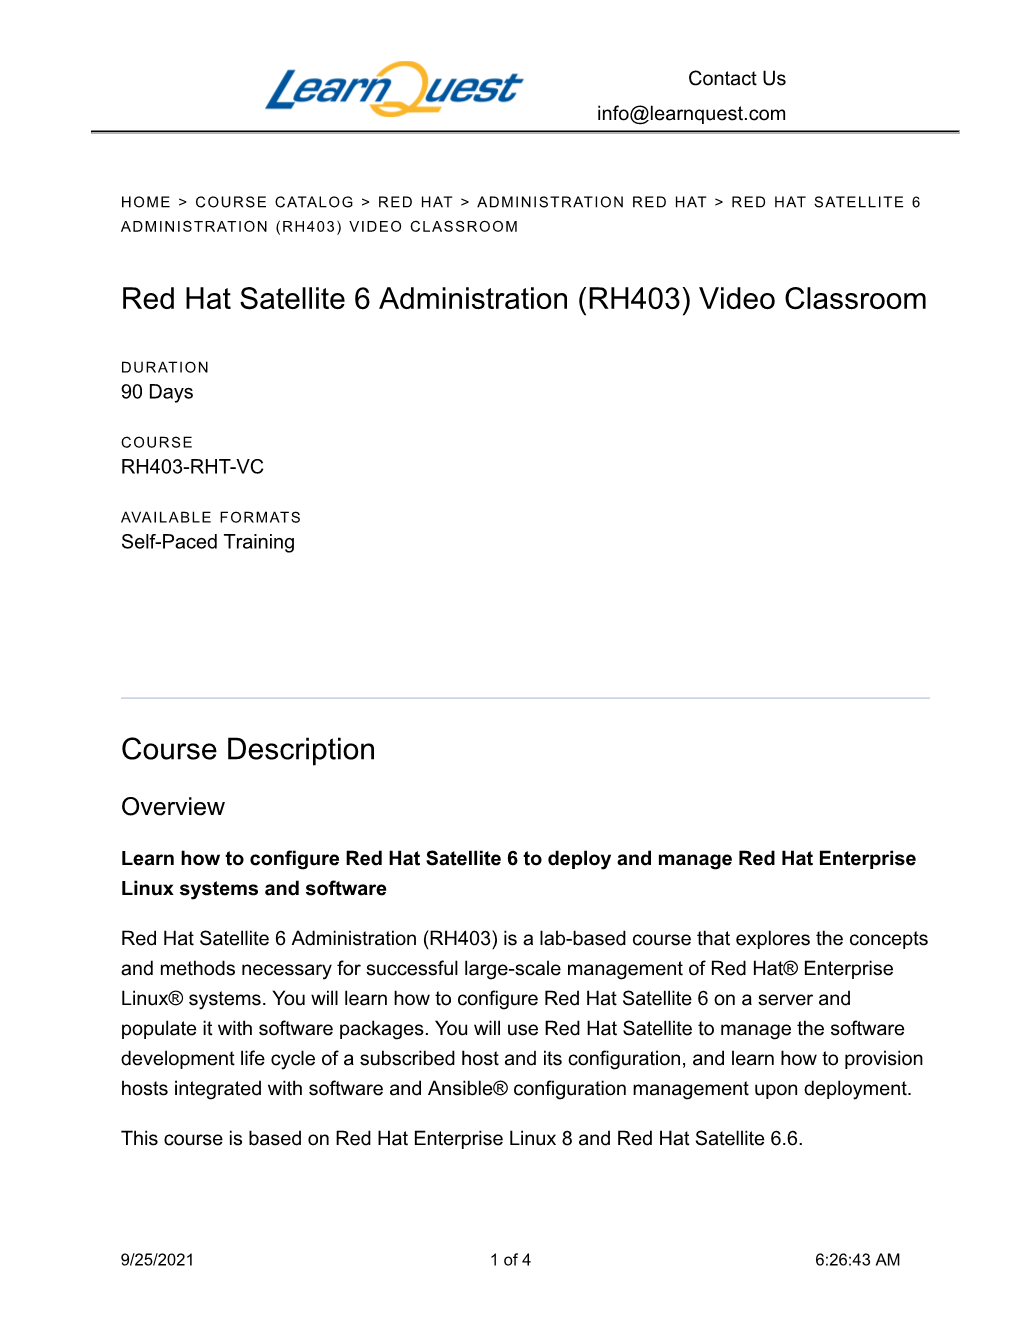 Red Hat Satellite 6 Administration (Rh403) Video Classroom